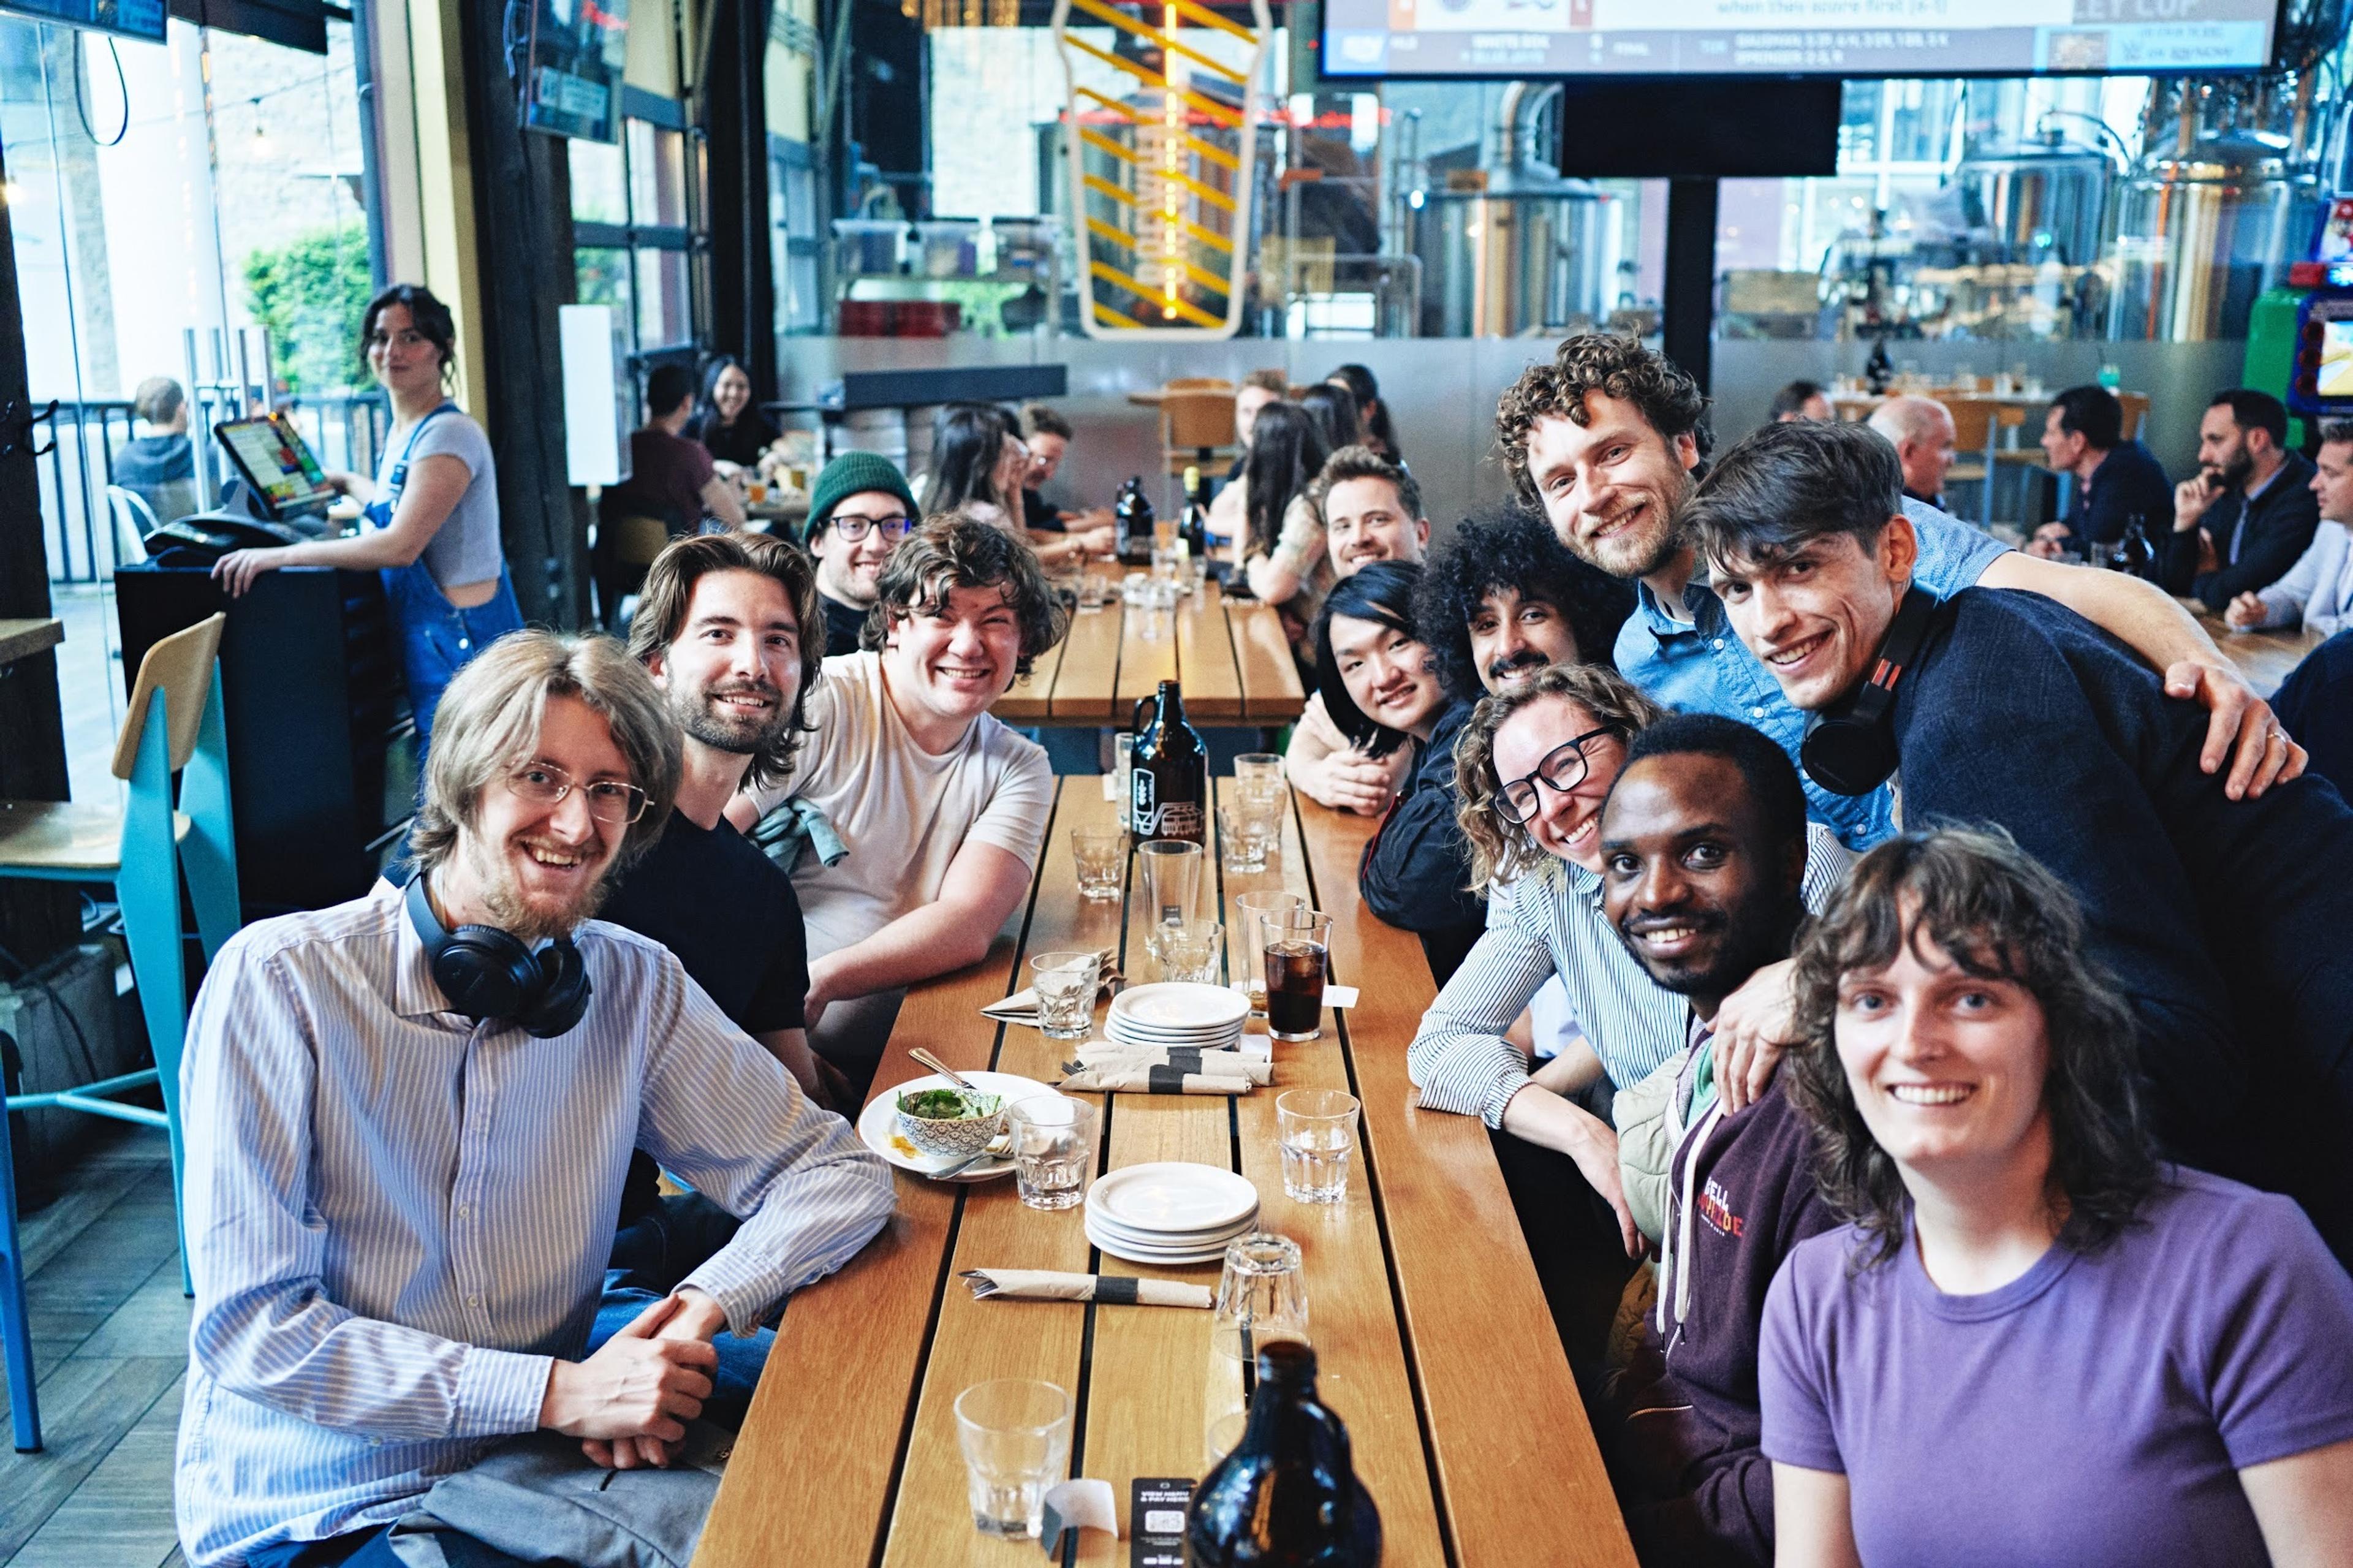 a group of people at a cafe smiling together